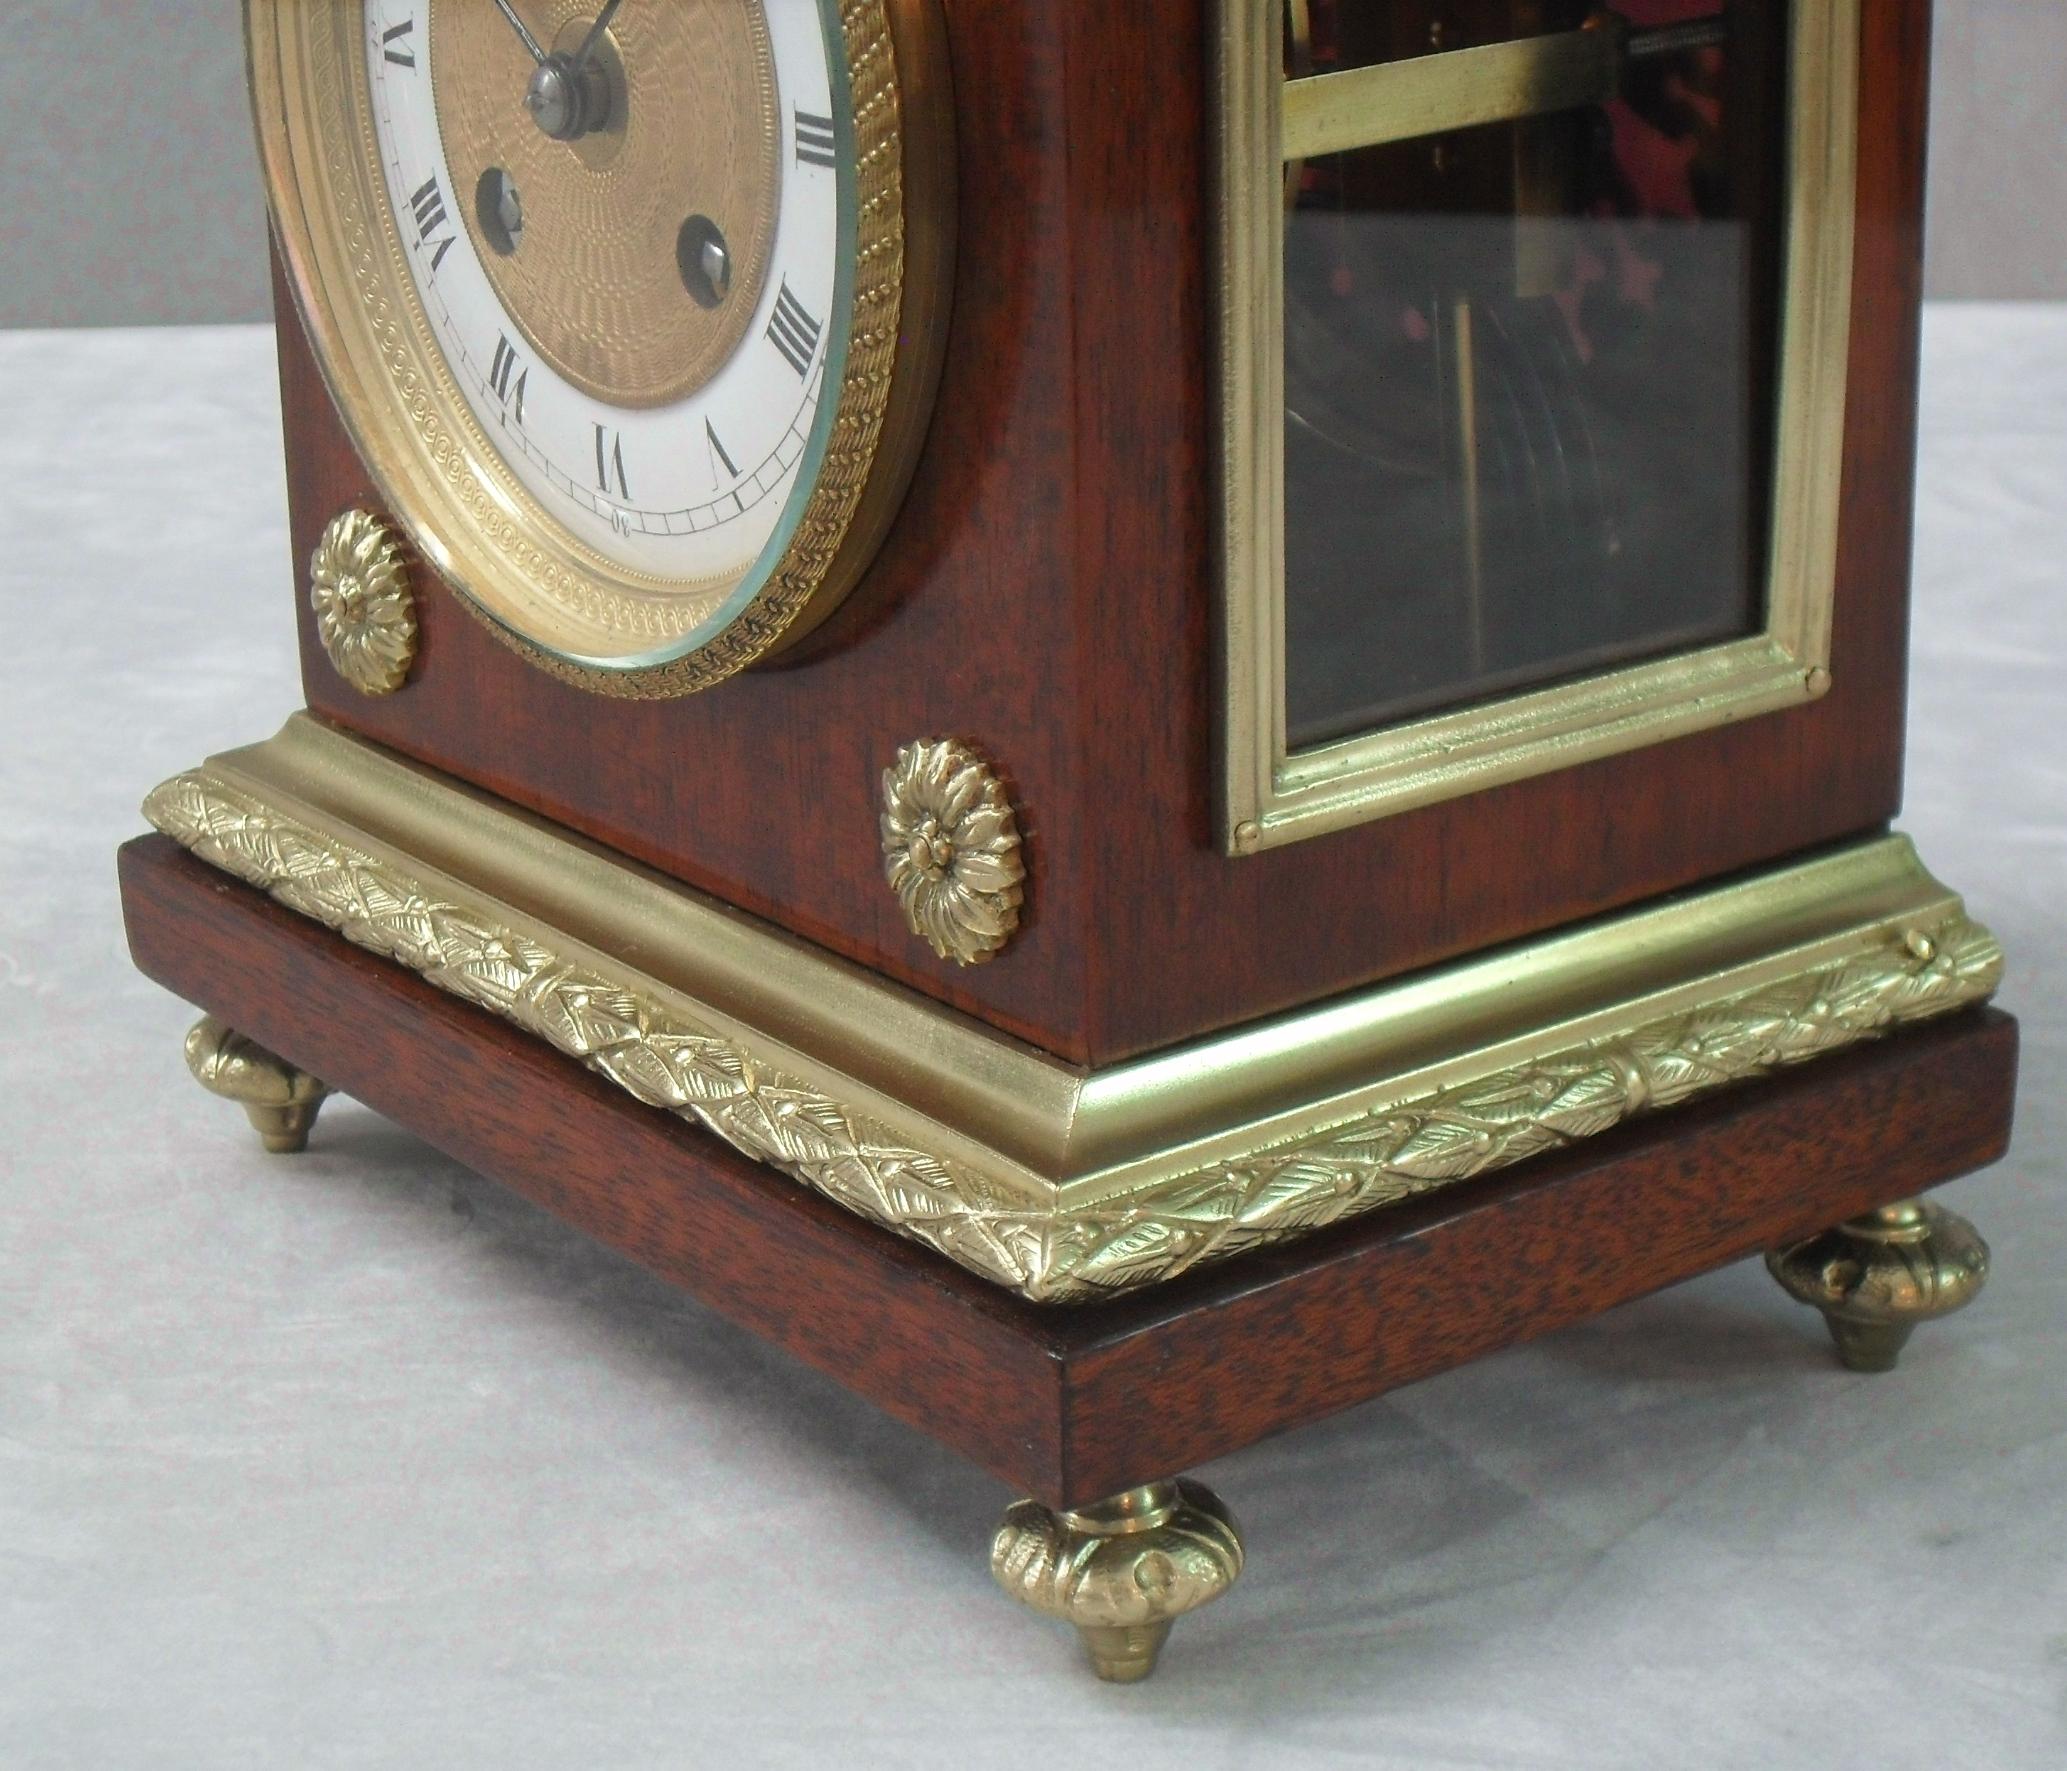 19th Century French Belle Epoque Mahogany Mantel Clock with Side Viewing Windows